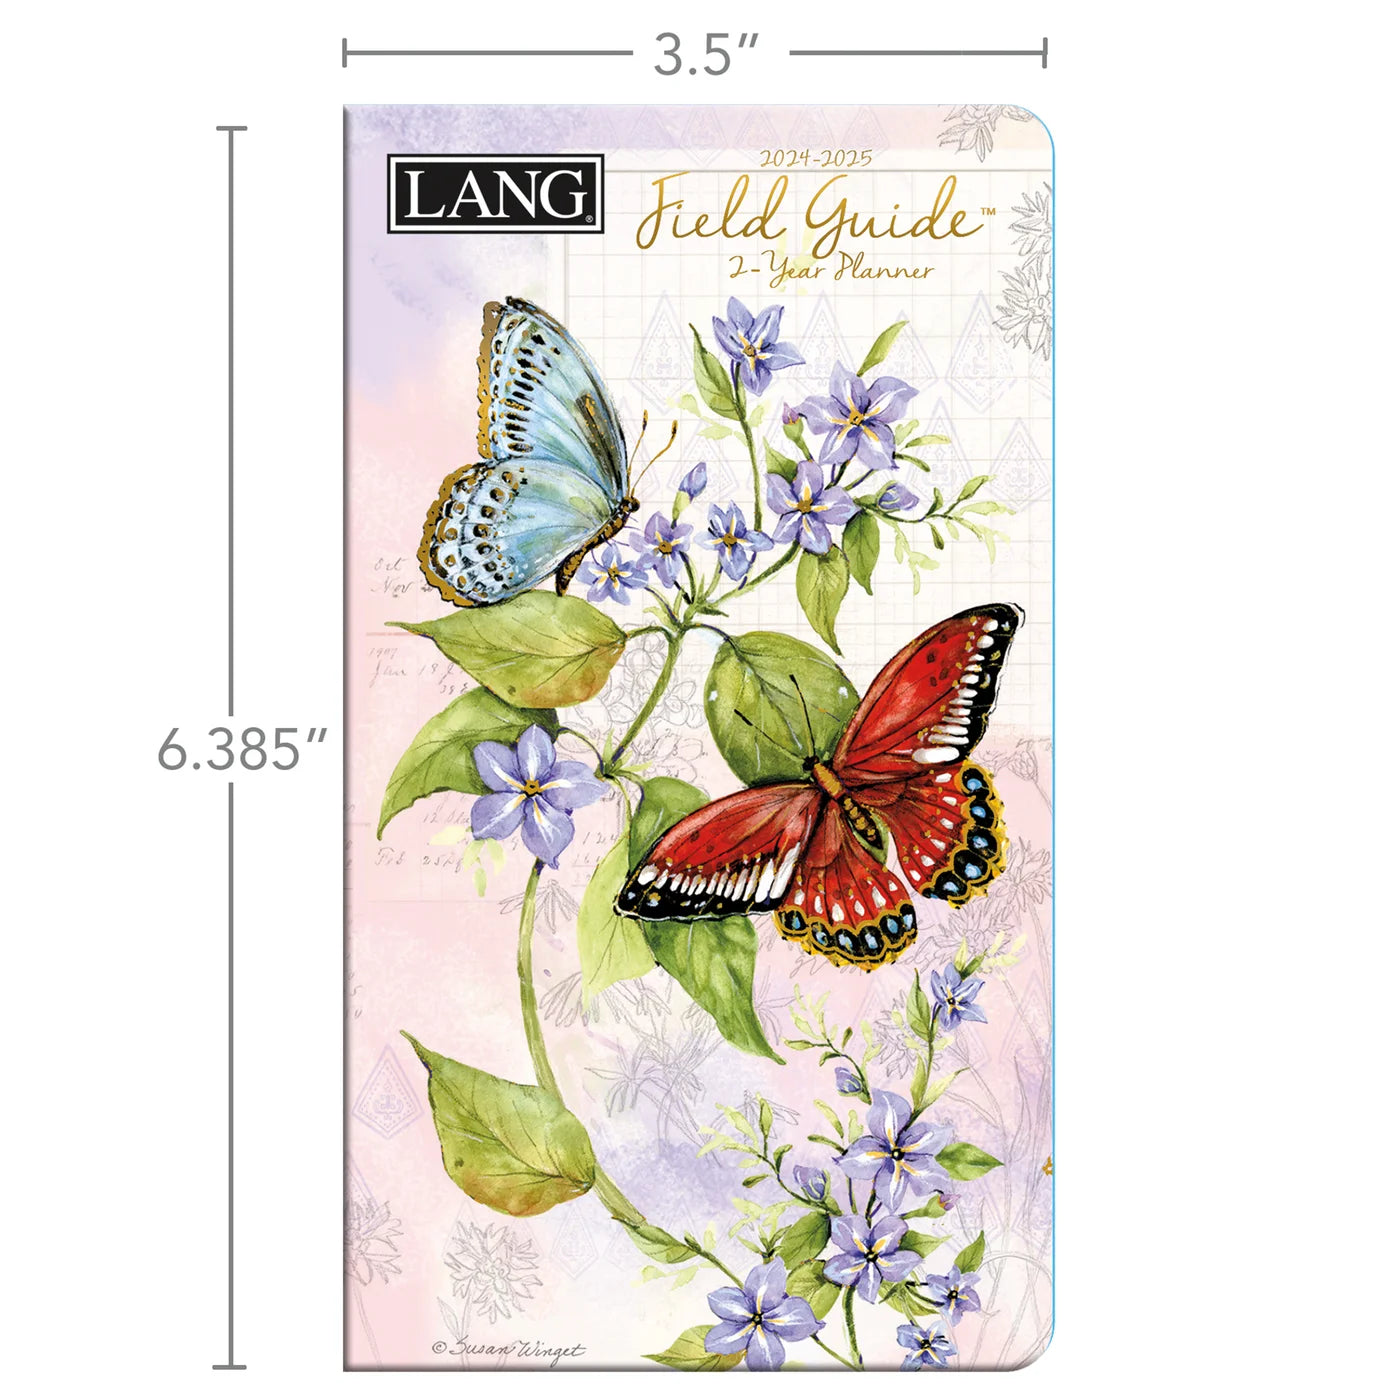 2024-2025 LANG Field Guide - 2 Year Pocket Diary/Planner